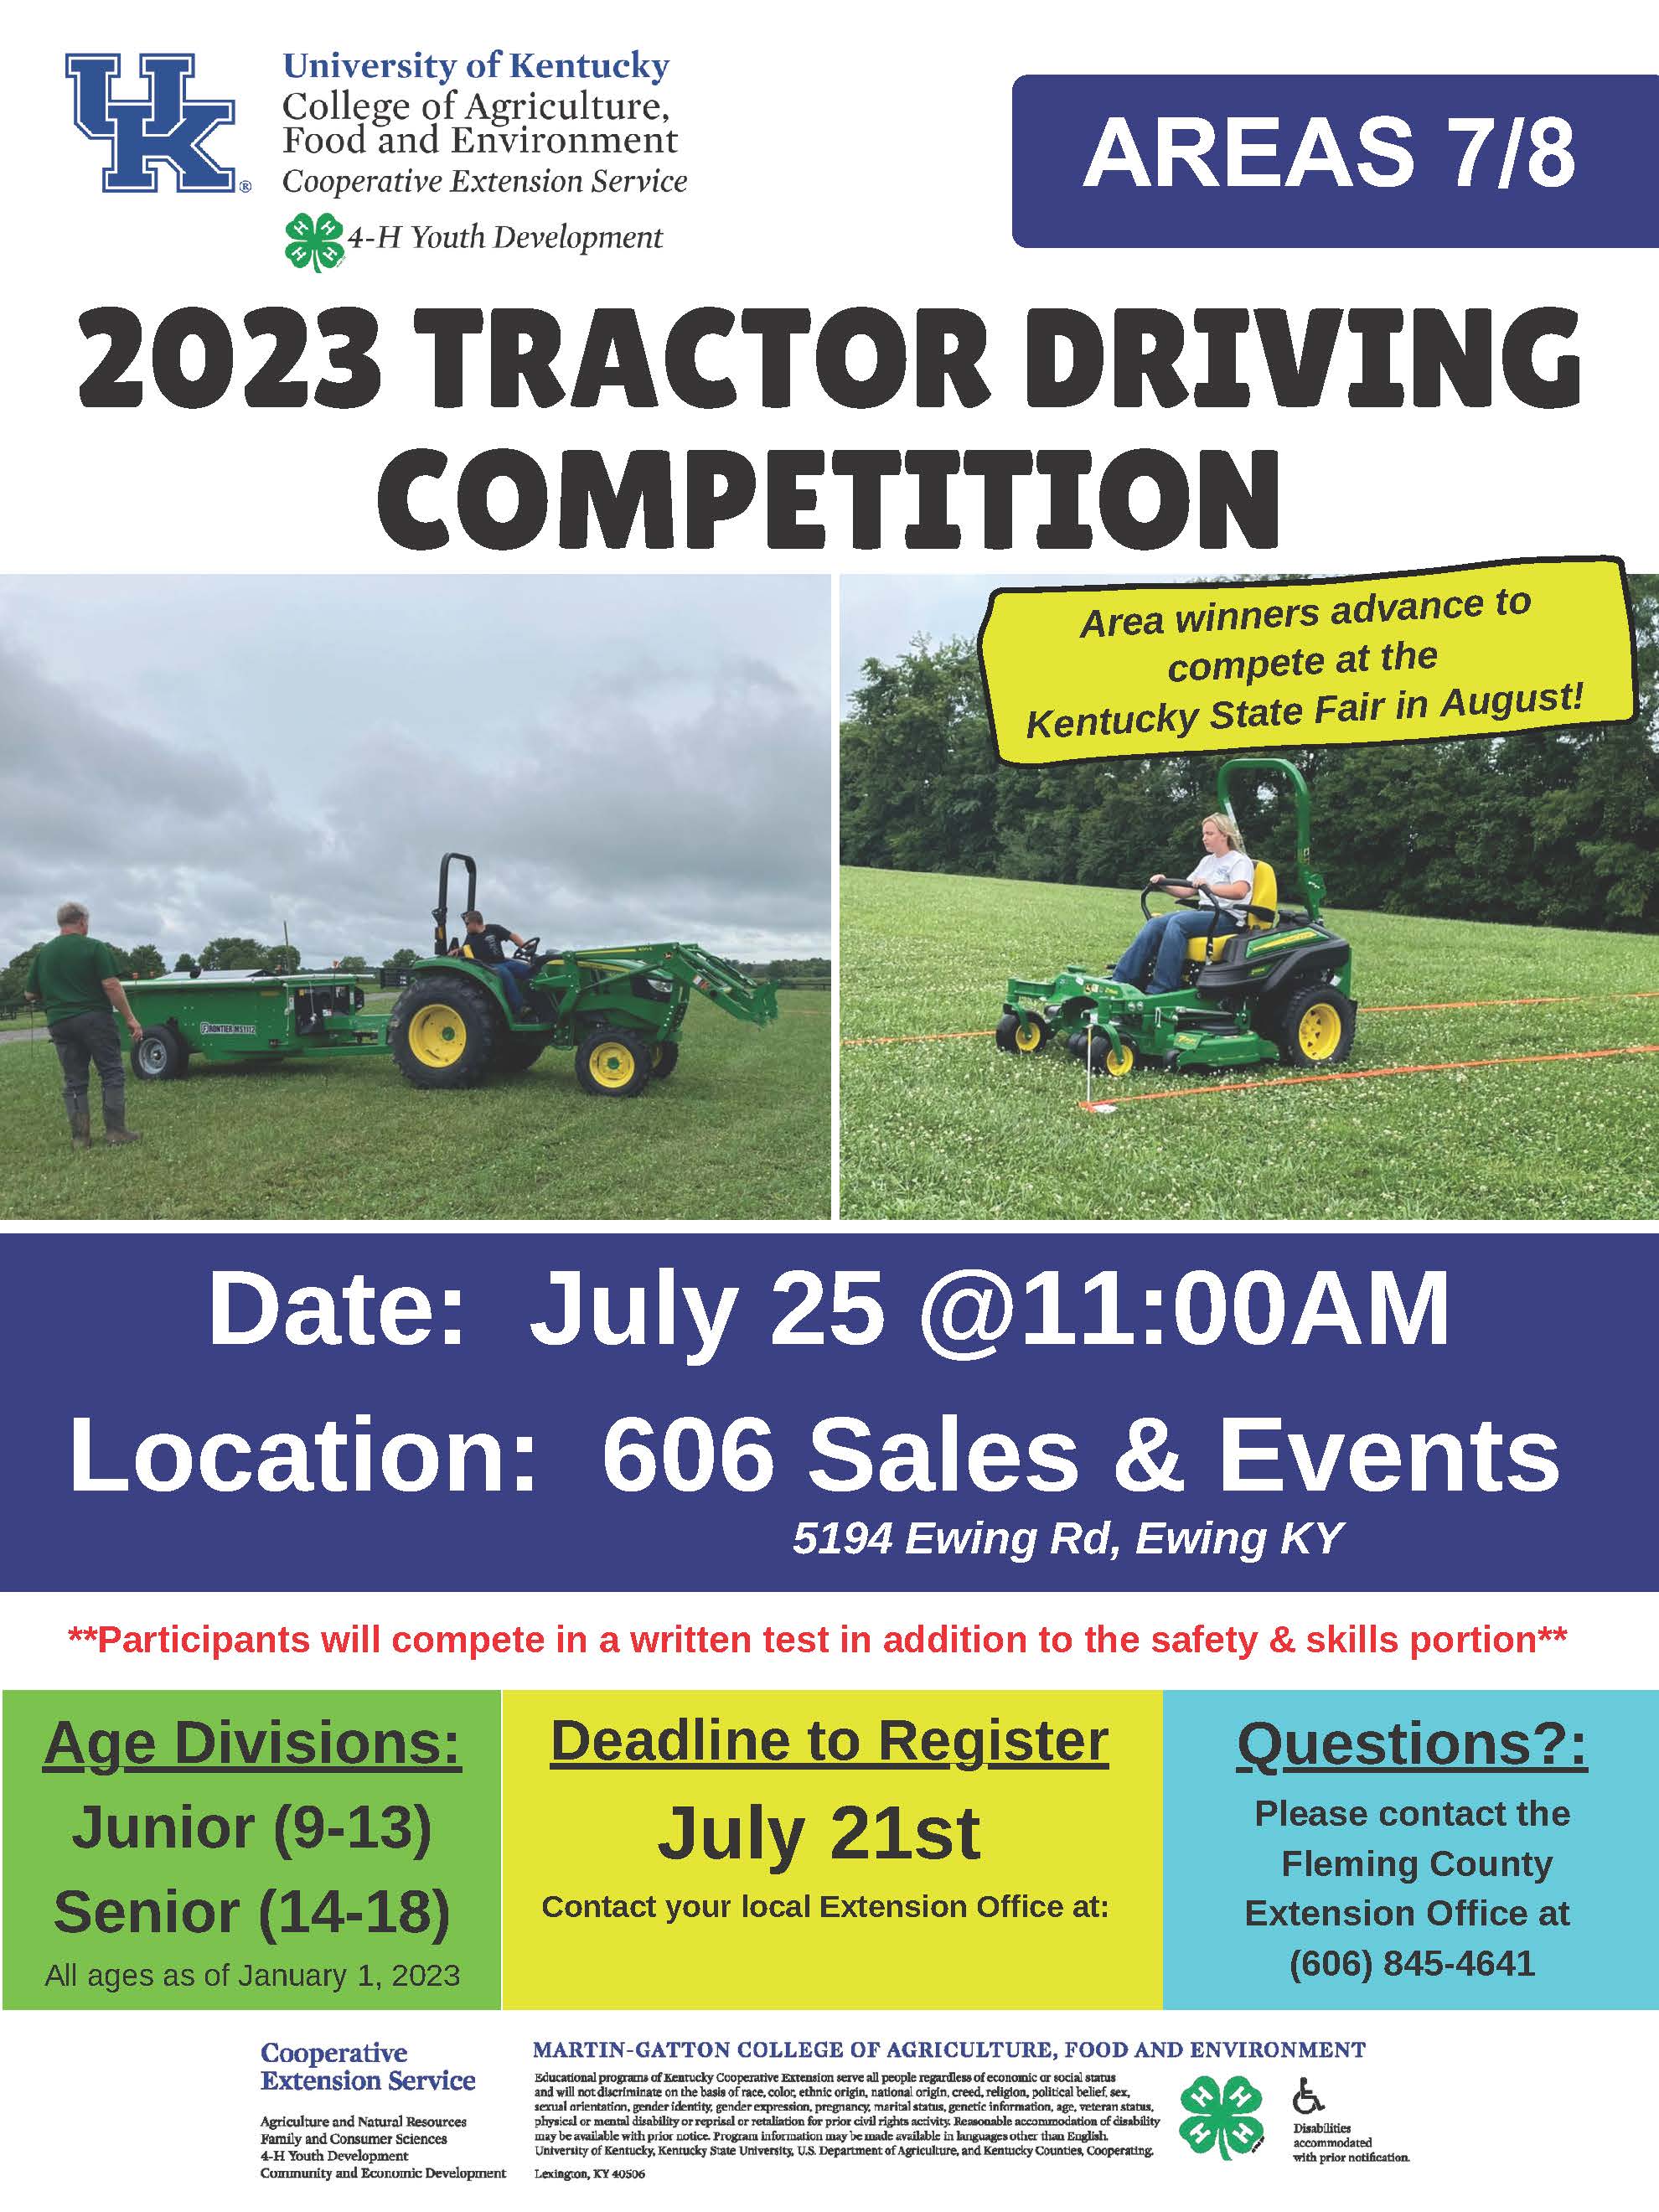 2023 Tractor Driving Contest flyer